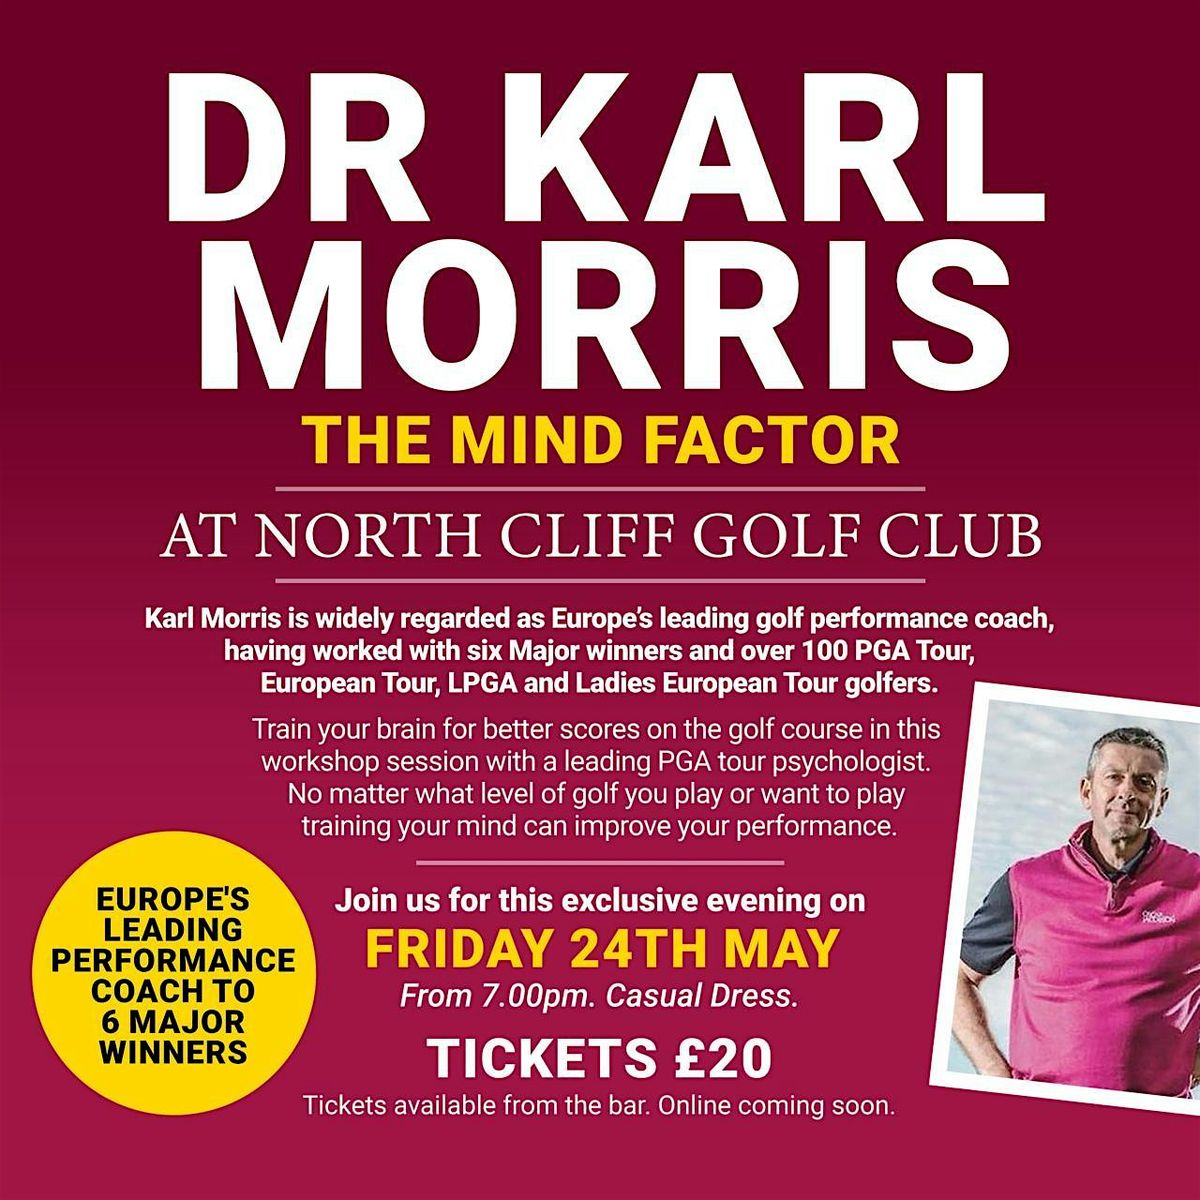 An Evening With Karl Morris